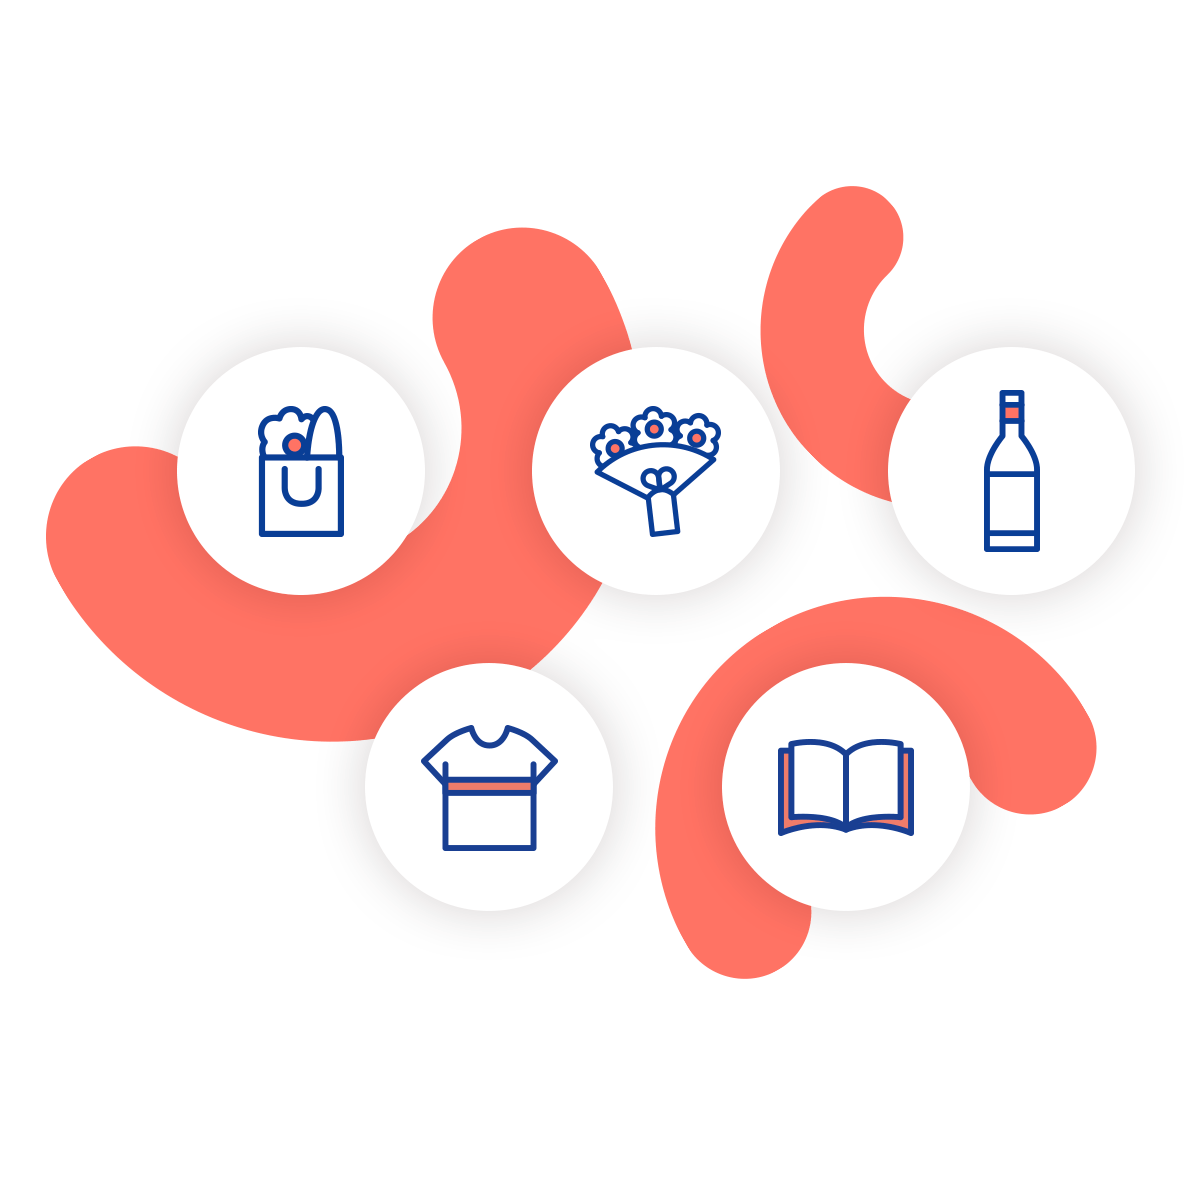 Bag, flower, wine, tshirt and book pictograms with an illustration